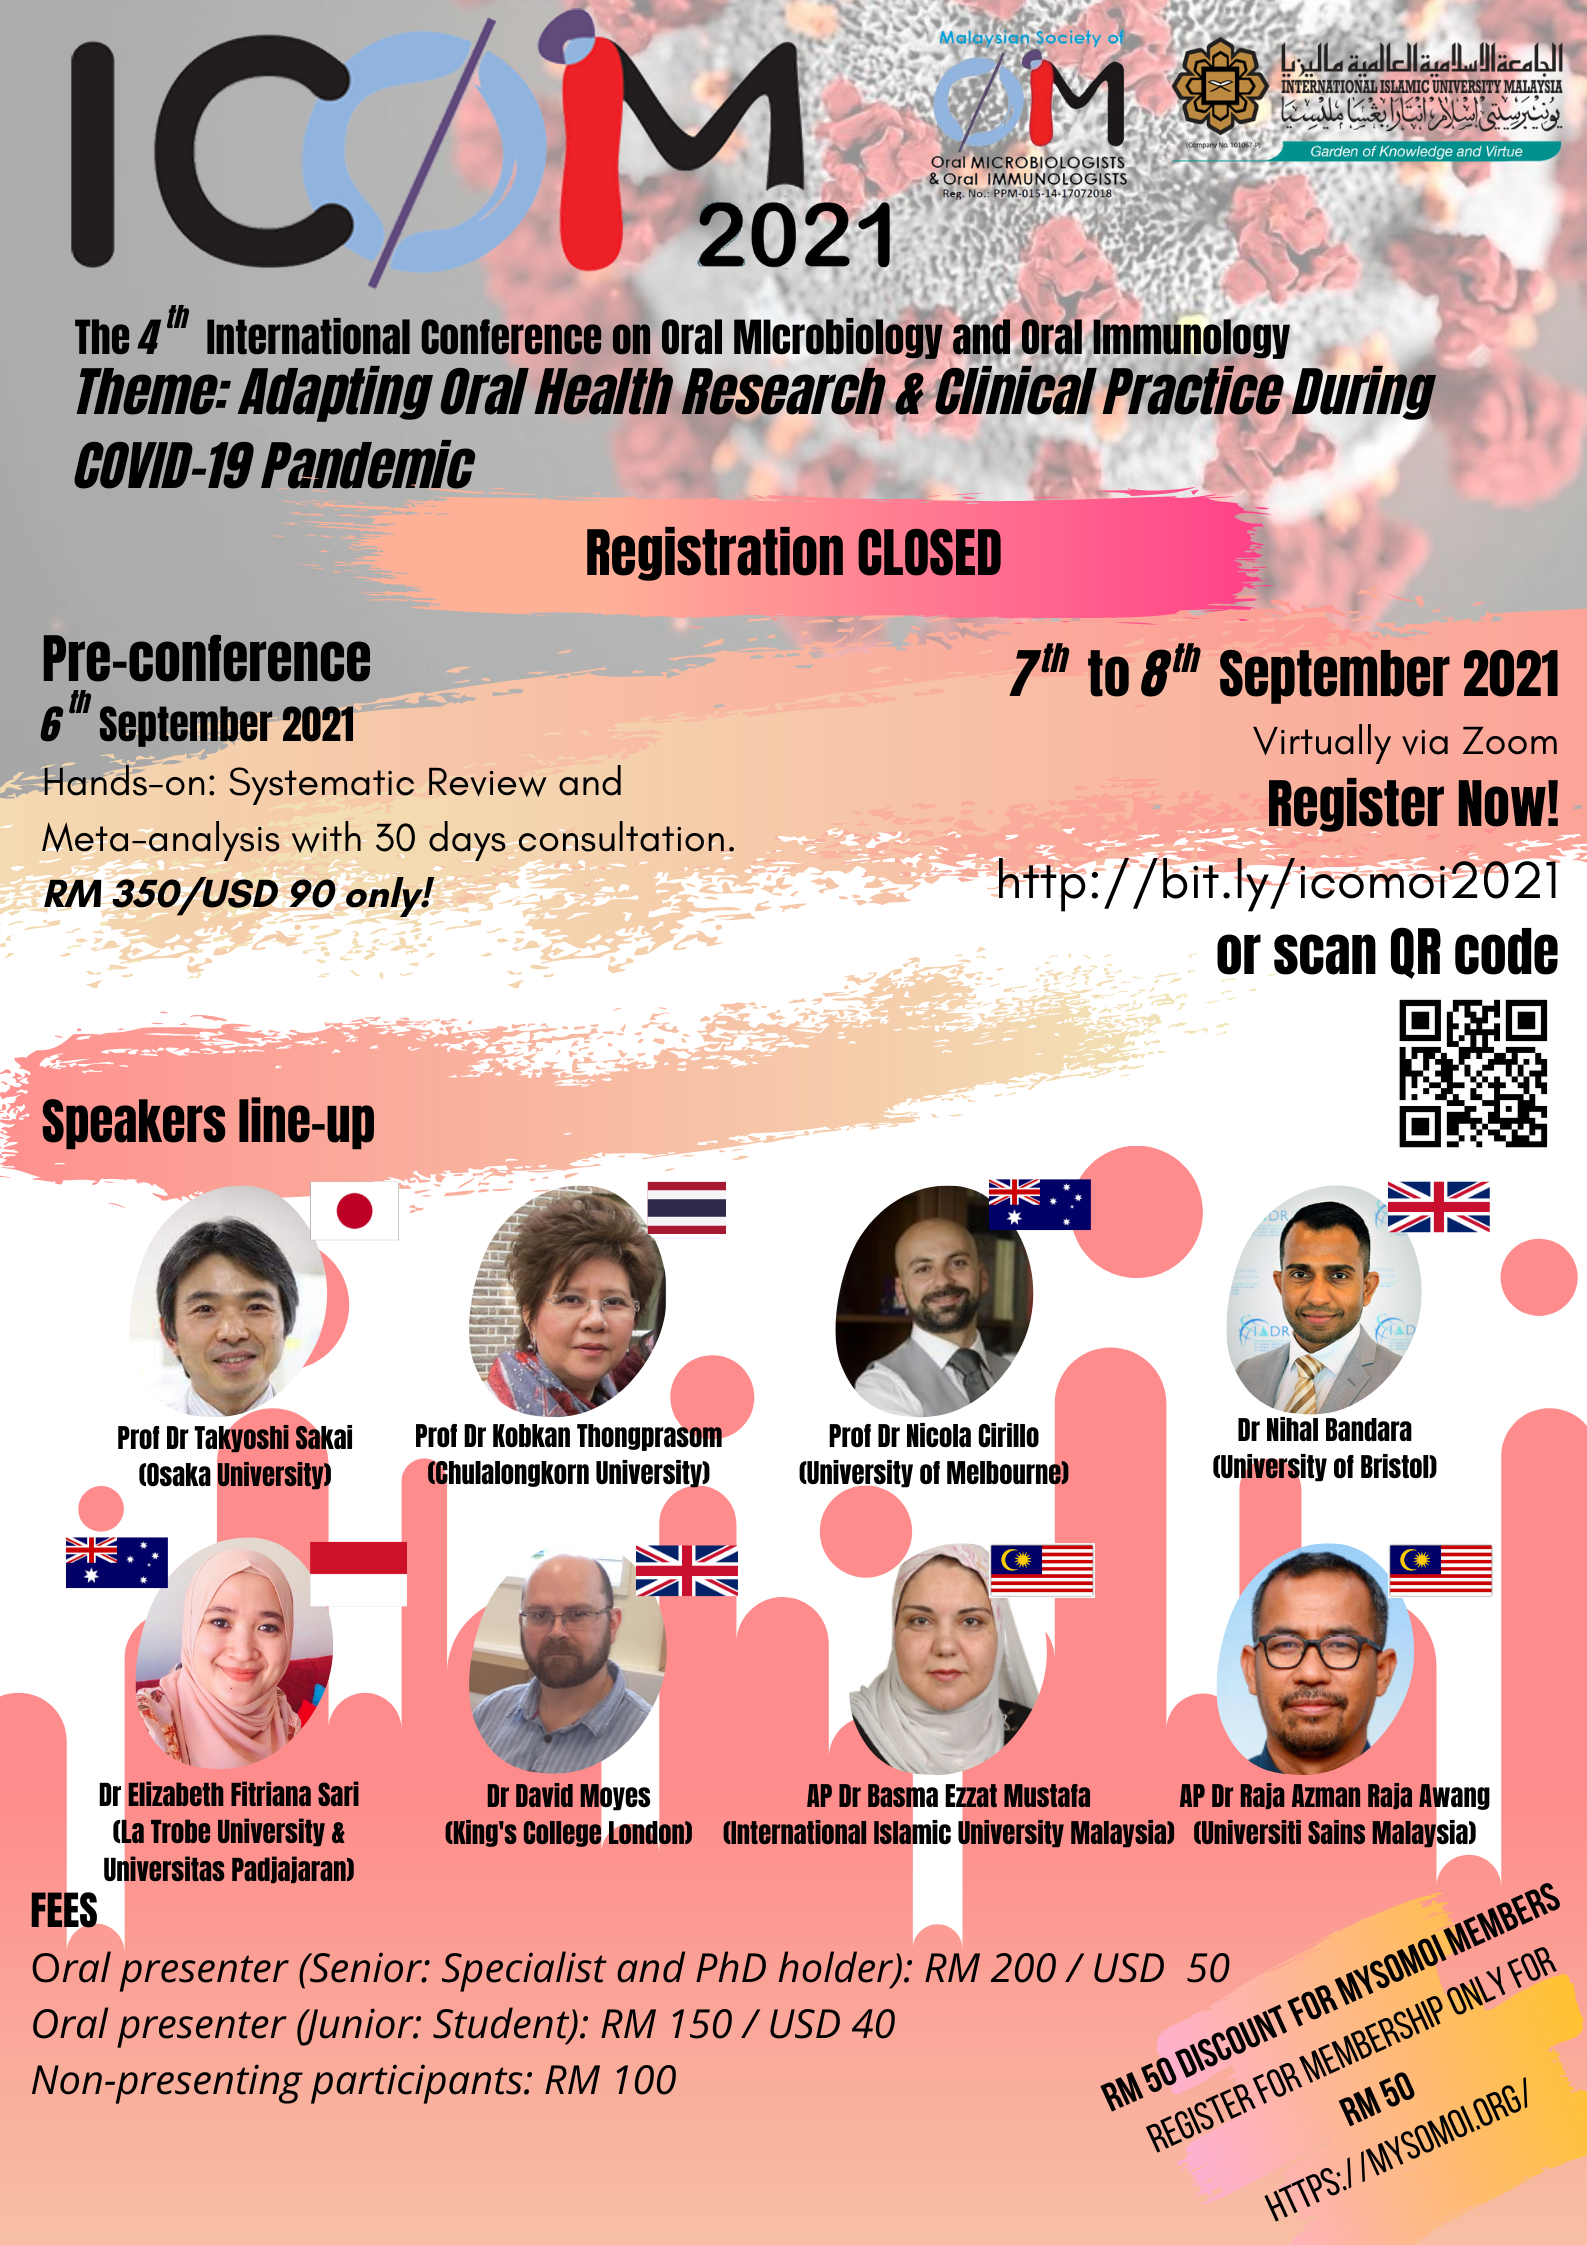 4th International Conference on Oral Microbiology and Oral Immunology